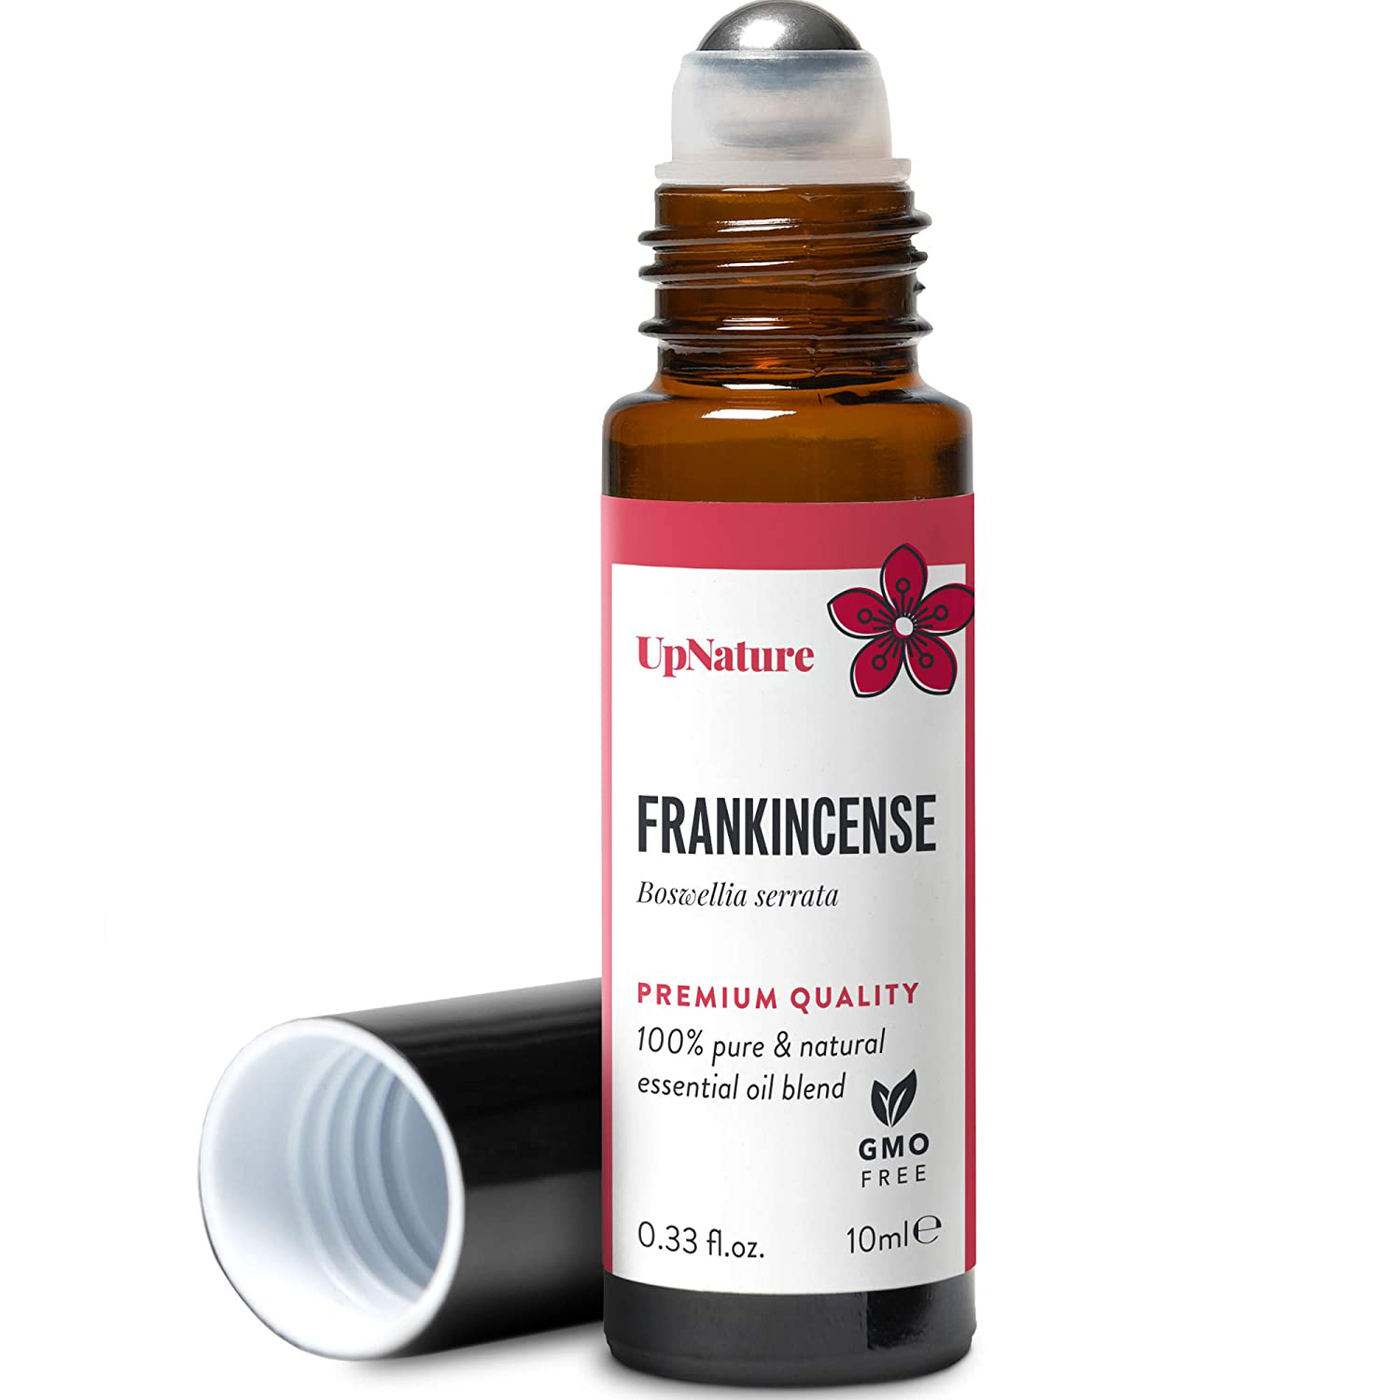 Frankincense Oil Roll-On – Frankincense Essential Oil Rollerball - Healthy Skin, Calm Your Spirit, Body, Mind – Aromatherapy, Therapeutic Grade, Pre-Diluted, Non-GMO